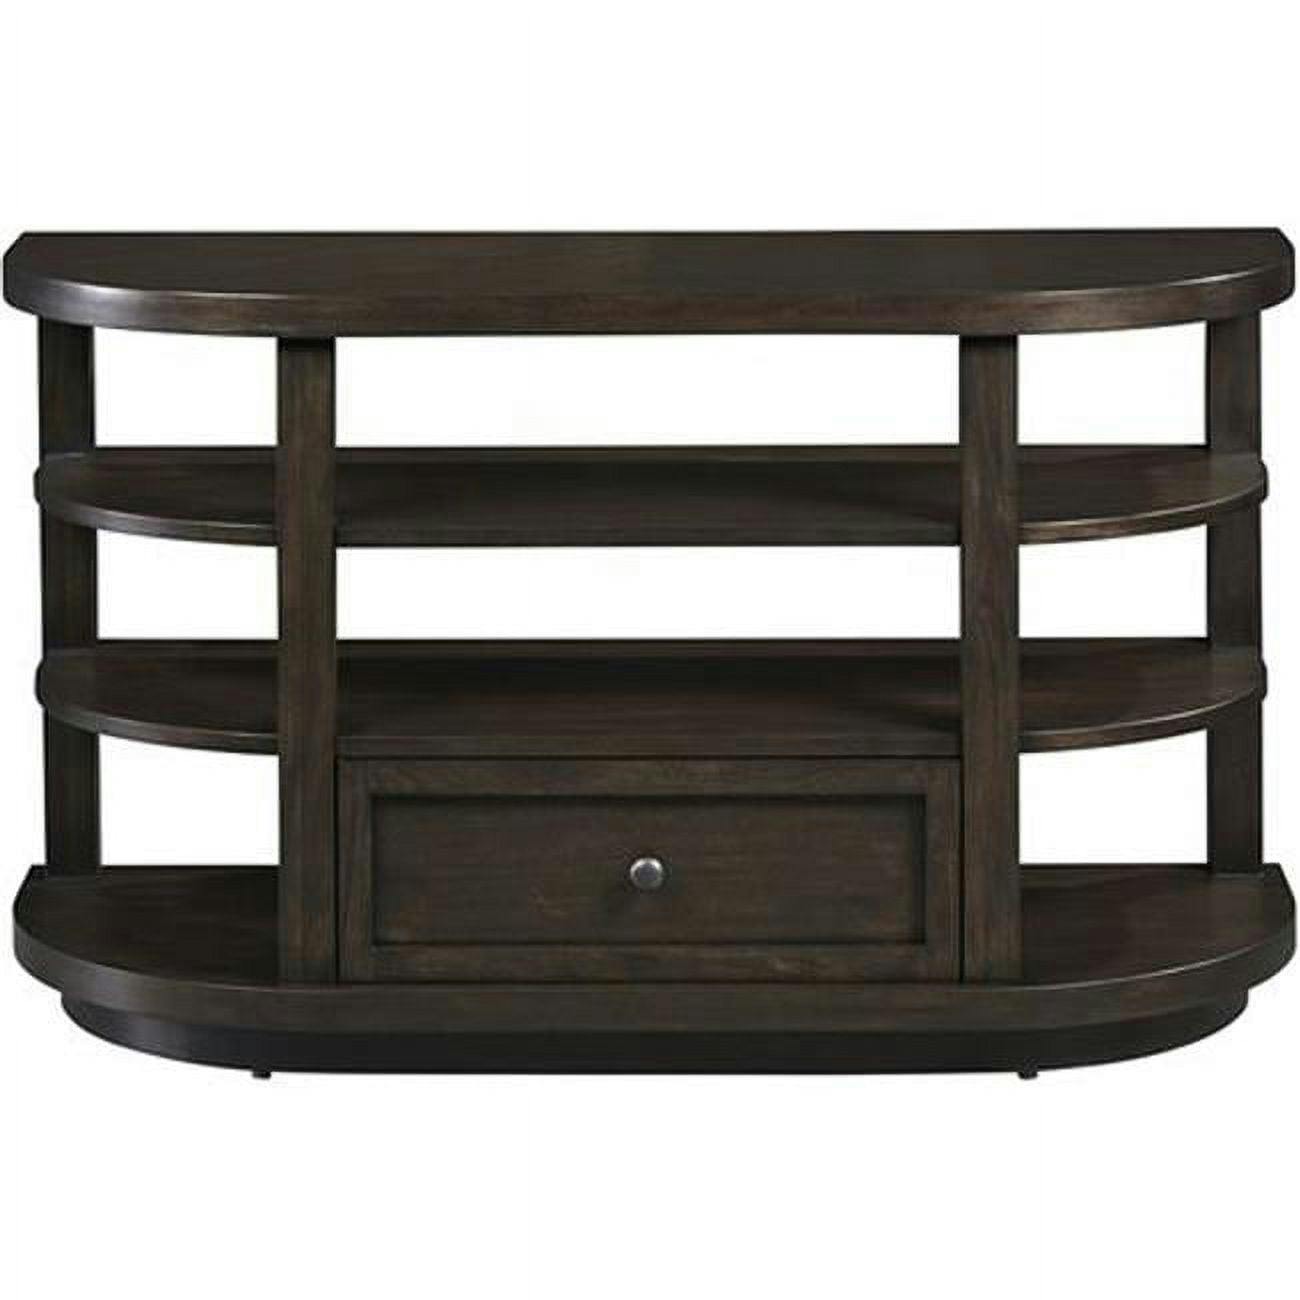 Grove Park Transitional Chocolate Mahogany Console Table with Storage